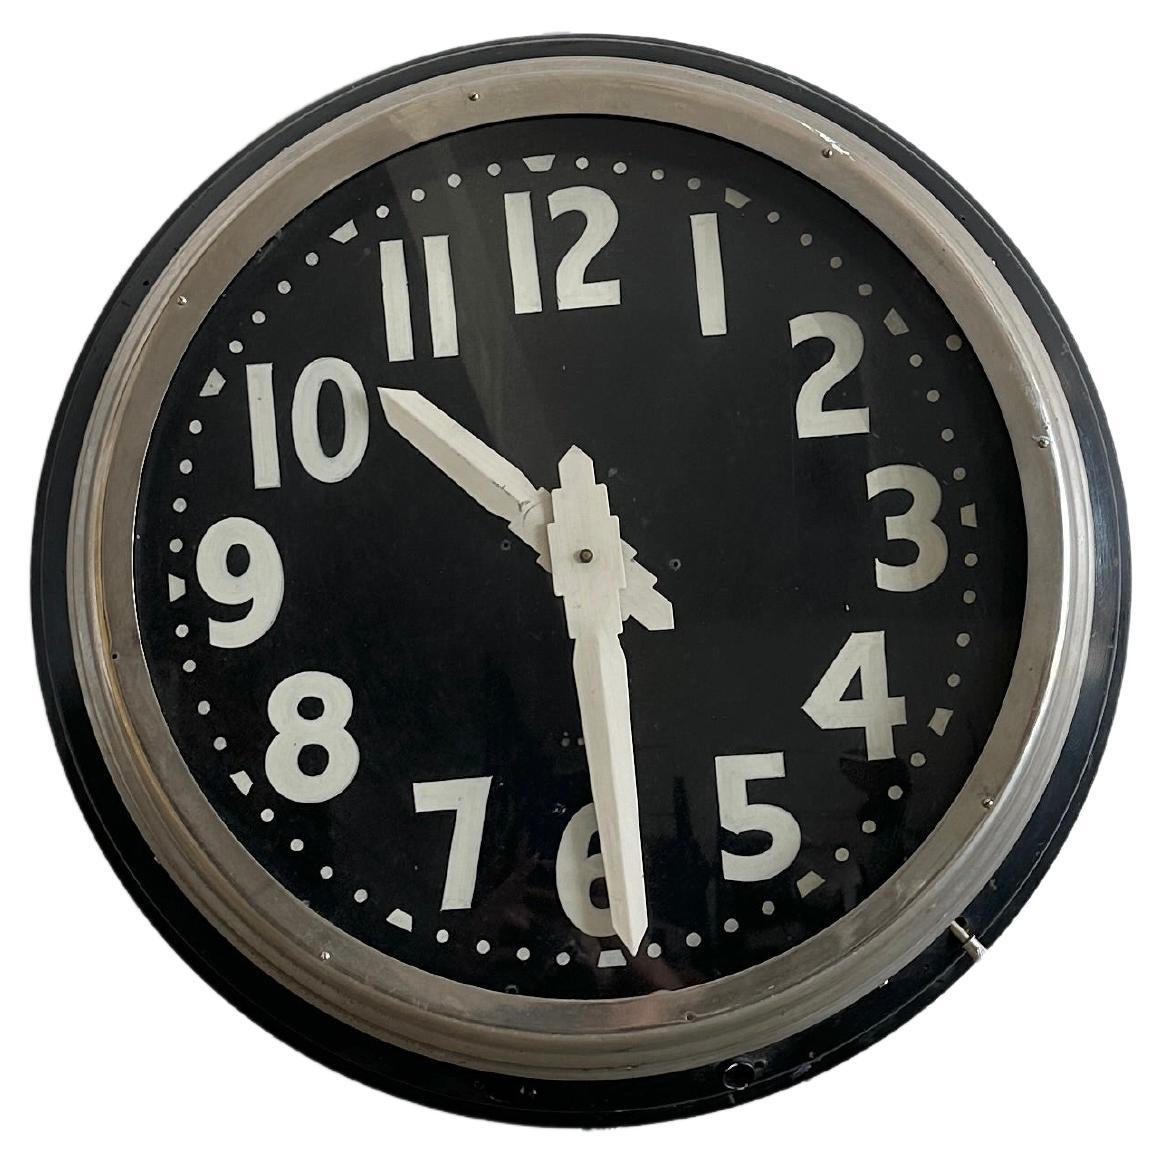 Oversized light-up antique factory wall clock For Sale